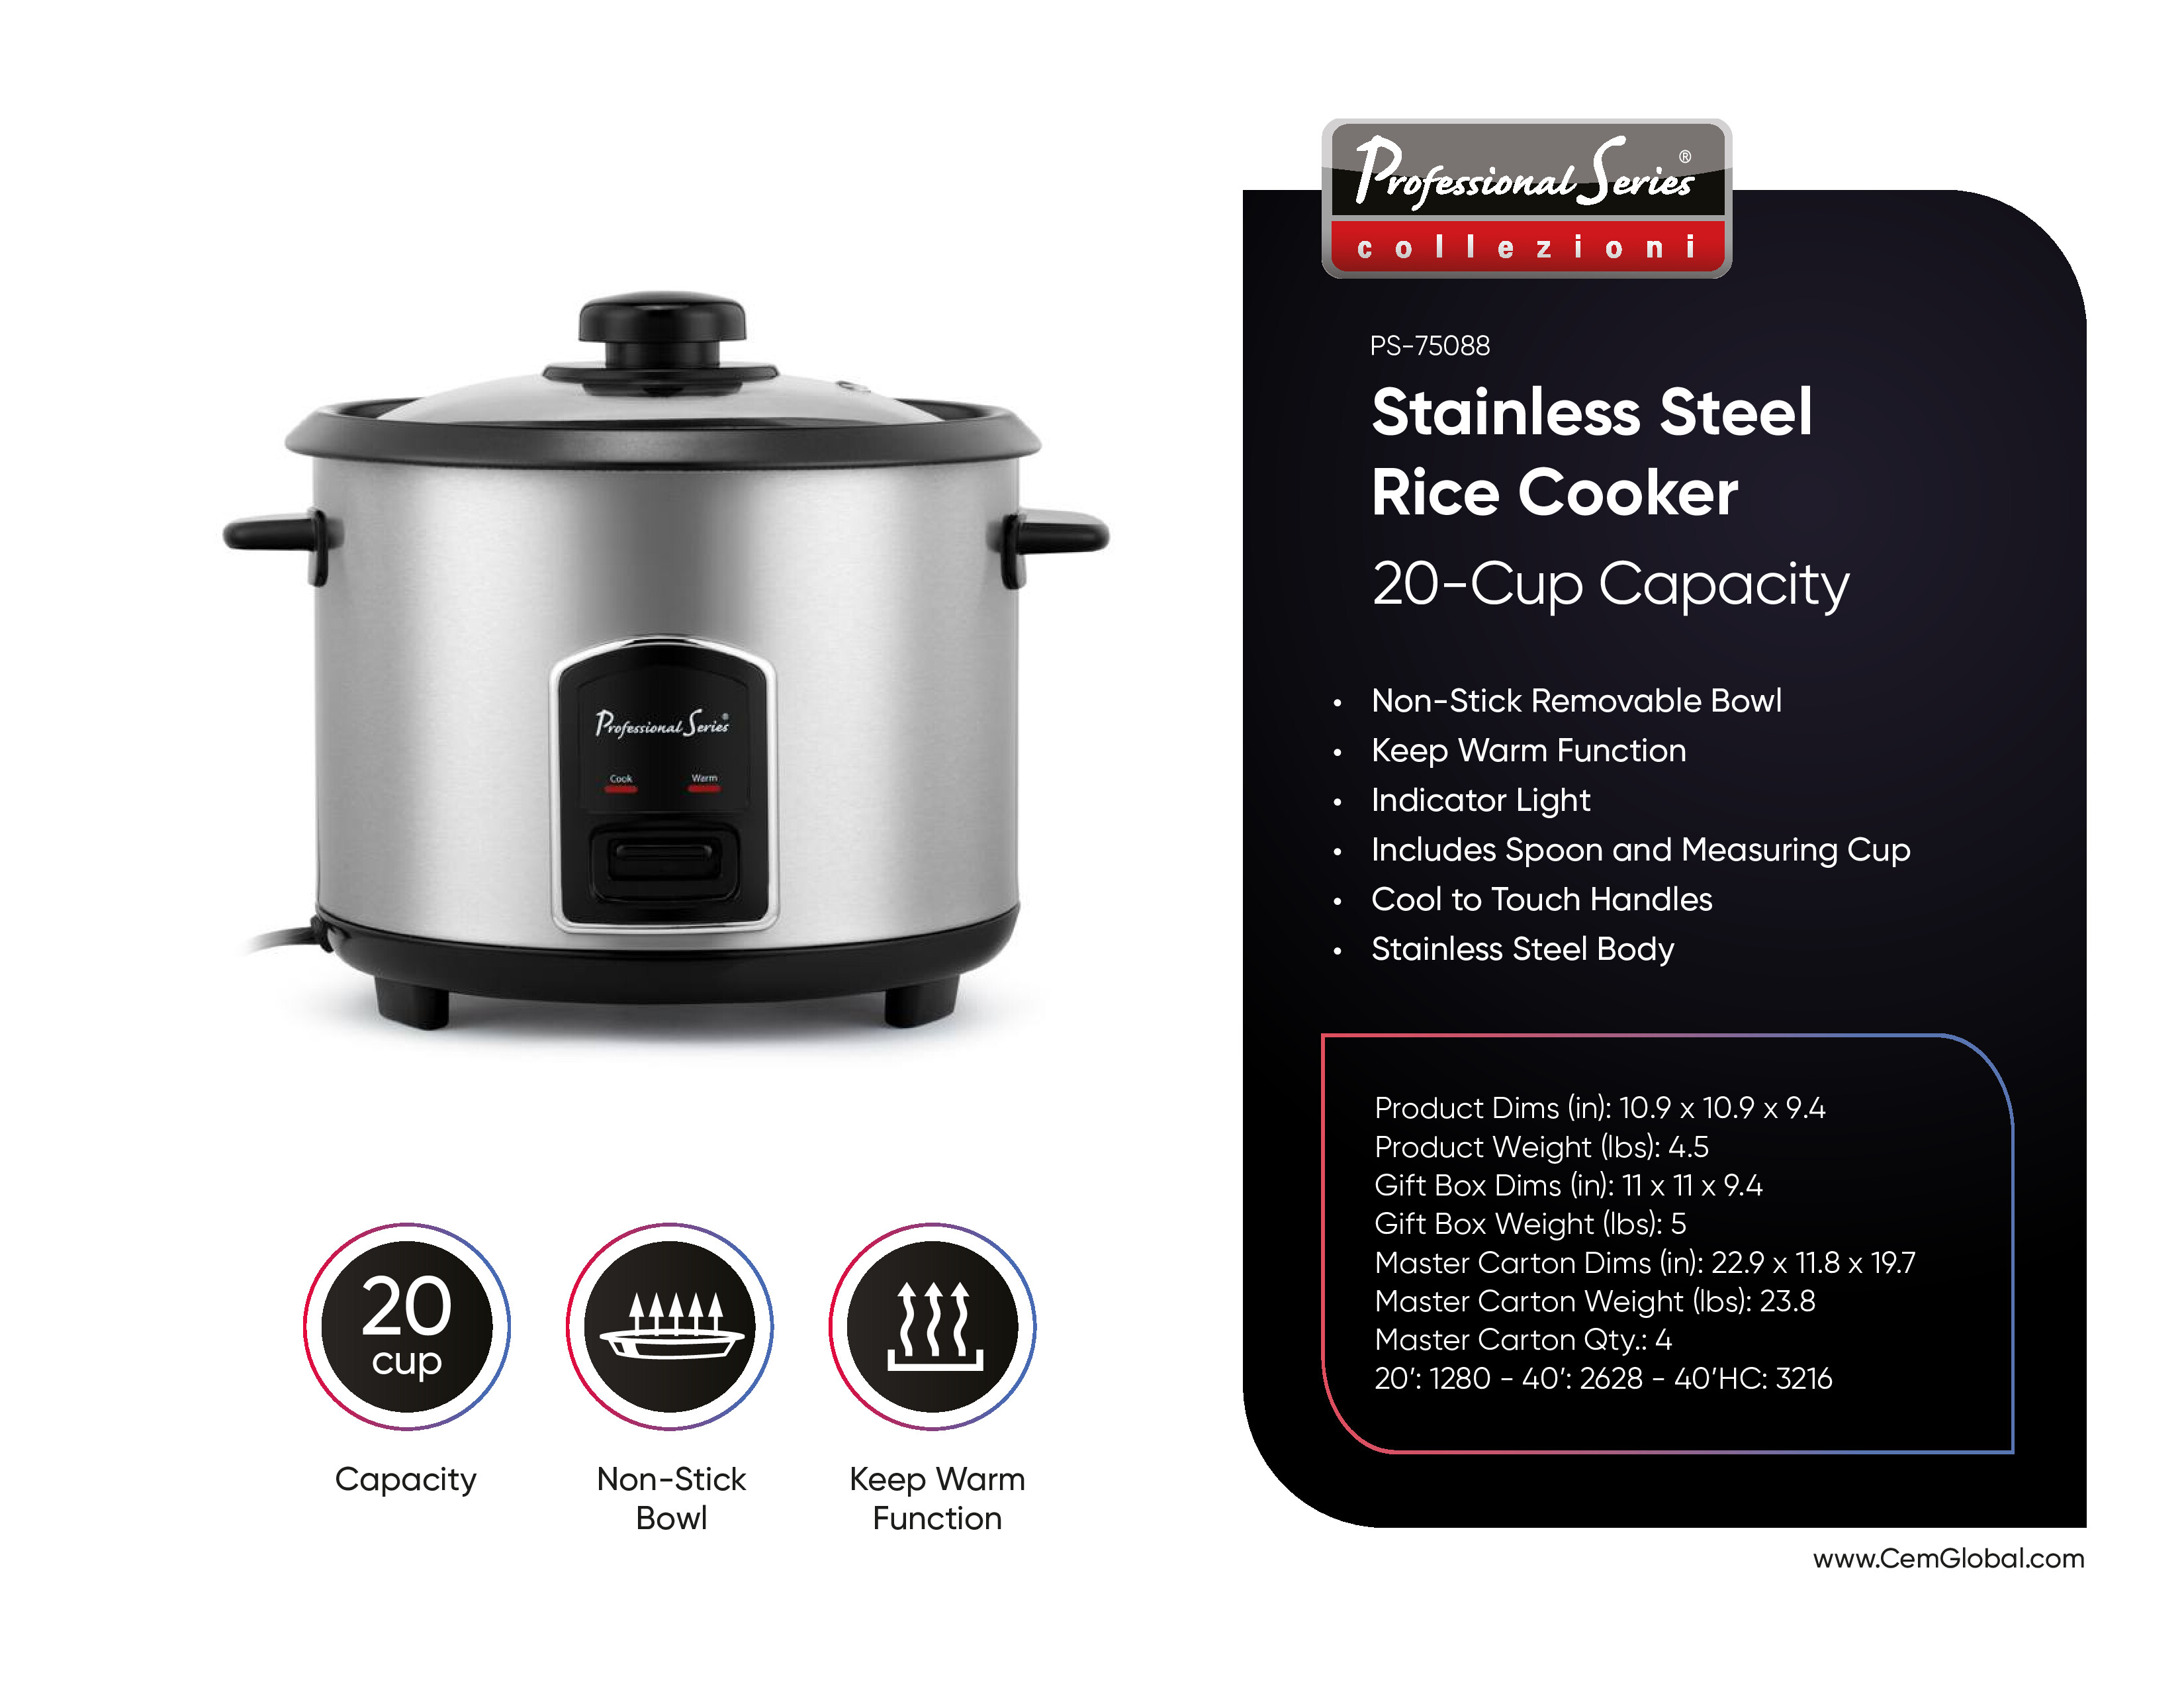 Rice Cooker 20-Cup Capacity